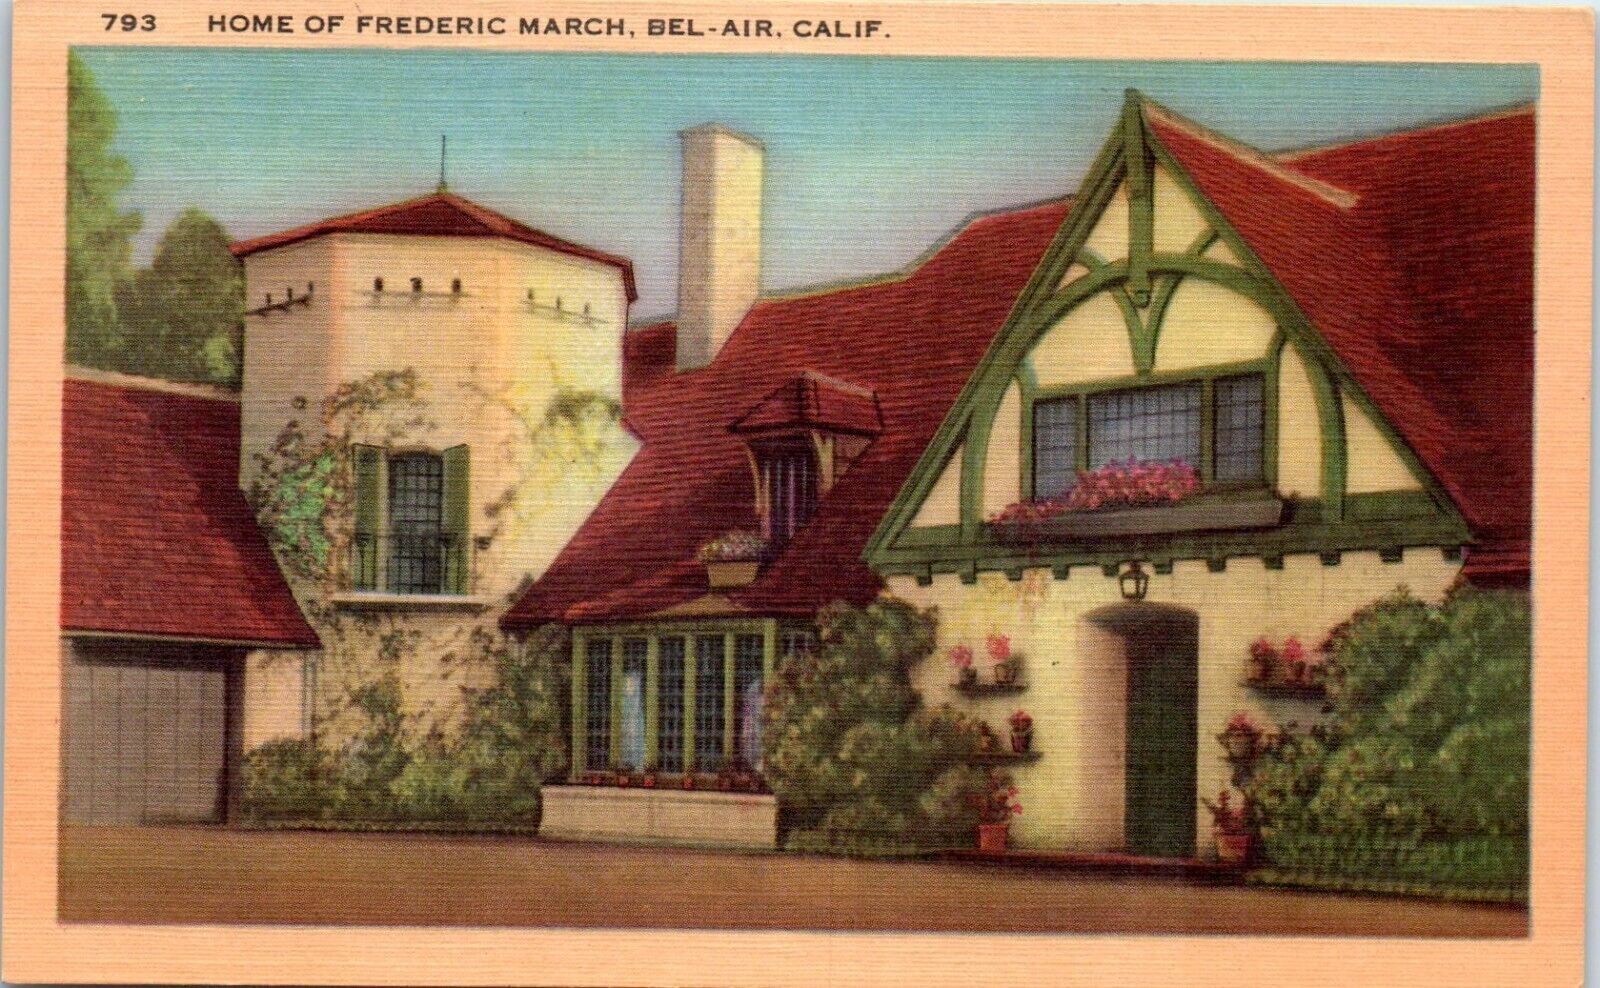 c1940s Linen Postcard Bel Air CA California Home of Frederic March